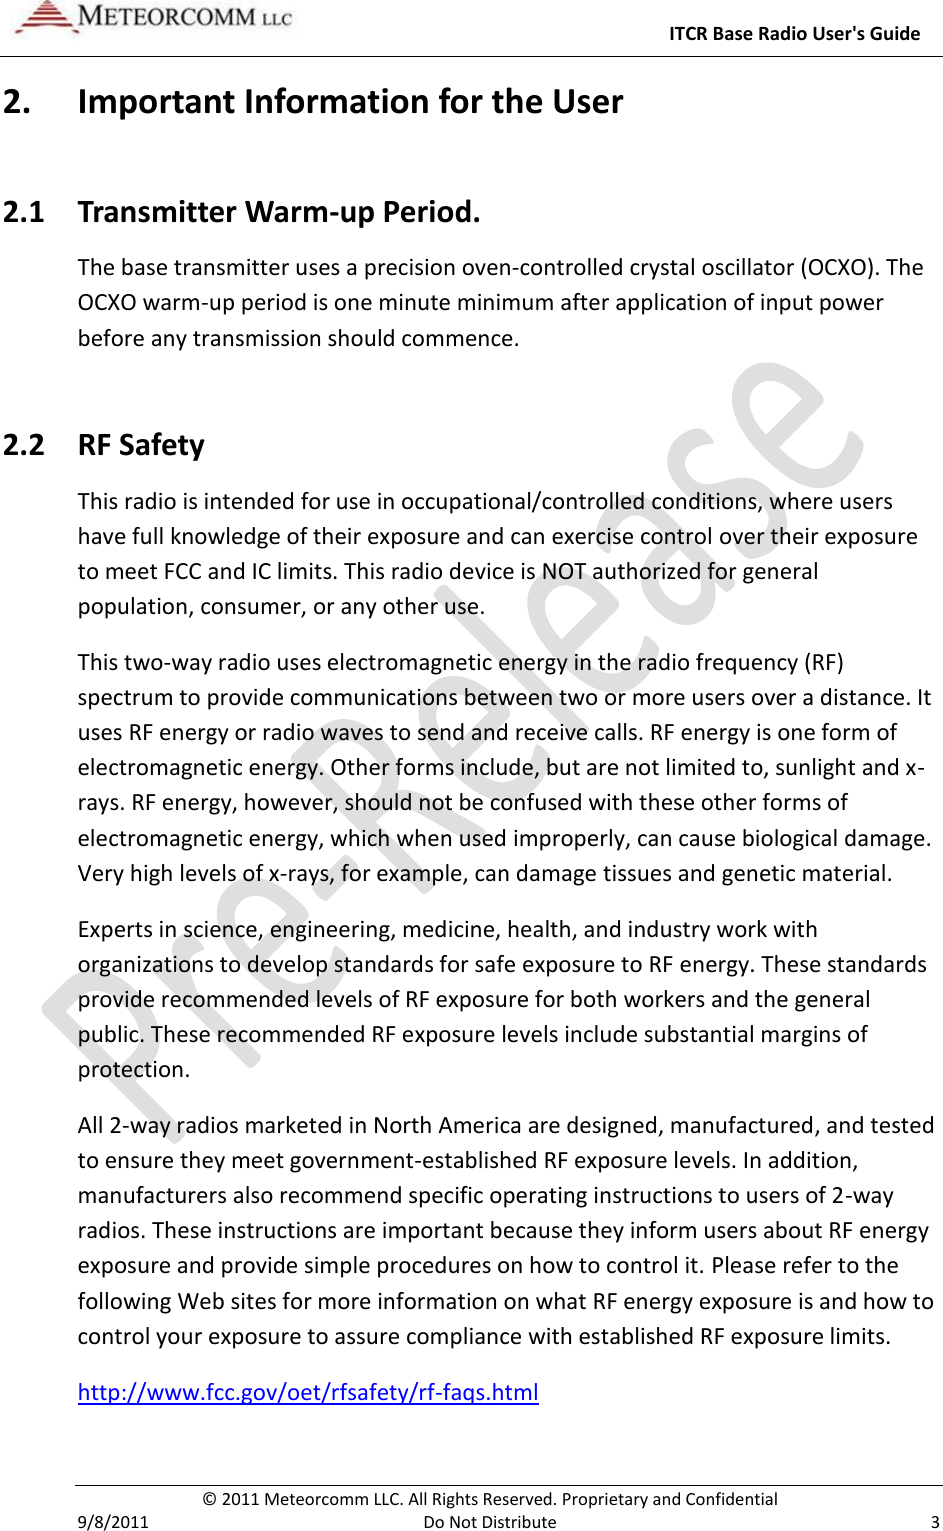     ITCR Base Radio User&apos;s Guide   © 2011 Meteorcomm LLC. All Rights Reserved. Proprietary and Confidential   9/8/2011  Do Not Distribute  3 2. Important Information for the User 2.1 Transmitter Warm-up Period. The base transmitter uses a precision oven-controlled crystal oscillator (OCXO). The OCXO warm-up period is one minute minimum after application of input power before any transmission should commence. 2.2 RF Safety This radio is intended for use in occupational/controlled conditions, where users have full knowledge of their exposure and can exercise control over their exposure to meet FCC and IC limits. This radio device is NOT authorized for general population, consumer, or any other use. This two-way radio uses electromagnetic energy in the radio frequency (RF) spectrum to provide communications between two or more users over a distance. It uses RF energy or radio waves to send and receive calls. RF energy is one form of electromagnetic energy. Other forms include, but are not limited to, sunlight and x-rays. RF energy, however, should not be confused with these other forms of electromagnetic energy, which when used improperly, can cause biological damage. Very high levels of x-rays, for example, can damage tissues and genetic material. Experts in science, engineering, medicine, health, and industry work with organizations to develop standards for safe exposure to RF energy. These standards provide recommended levels of RF exposure for both workers and the general public. These recommended RF exposure levels include substantial margins of protection. All 2-way radios marketed in North America are designed, manufactured, and tested to ensure they meet government-established RF exposure levels. In addition, manufacturers also recommend specific operating instructions to users of 2-way radios. These instructions are important because they inform users about RF energy exposure and provide simple procedures on how to control it. Please refer to the following Web sites for more information on what RF energy exposure is and how to control your exposure to assure compliance with established RF exposure limits. http://www.fcc.gov/oet/rfsafety/rf-faqs.html  